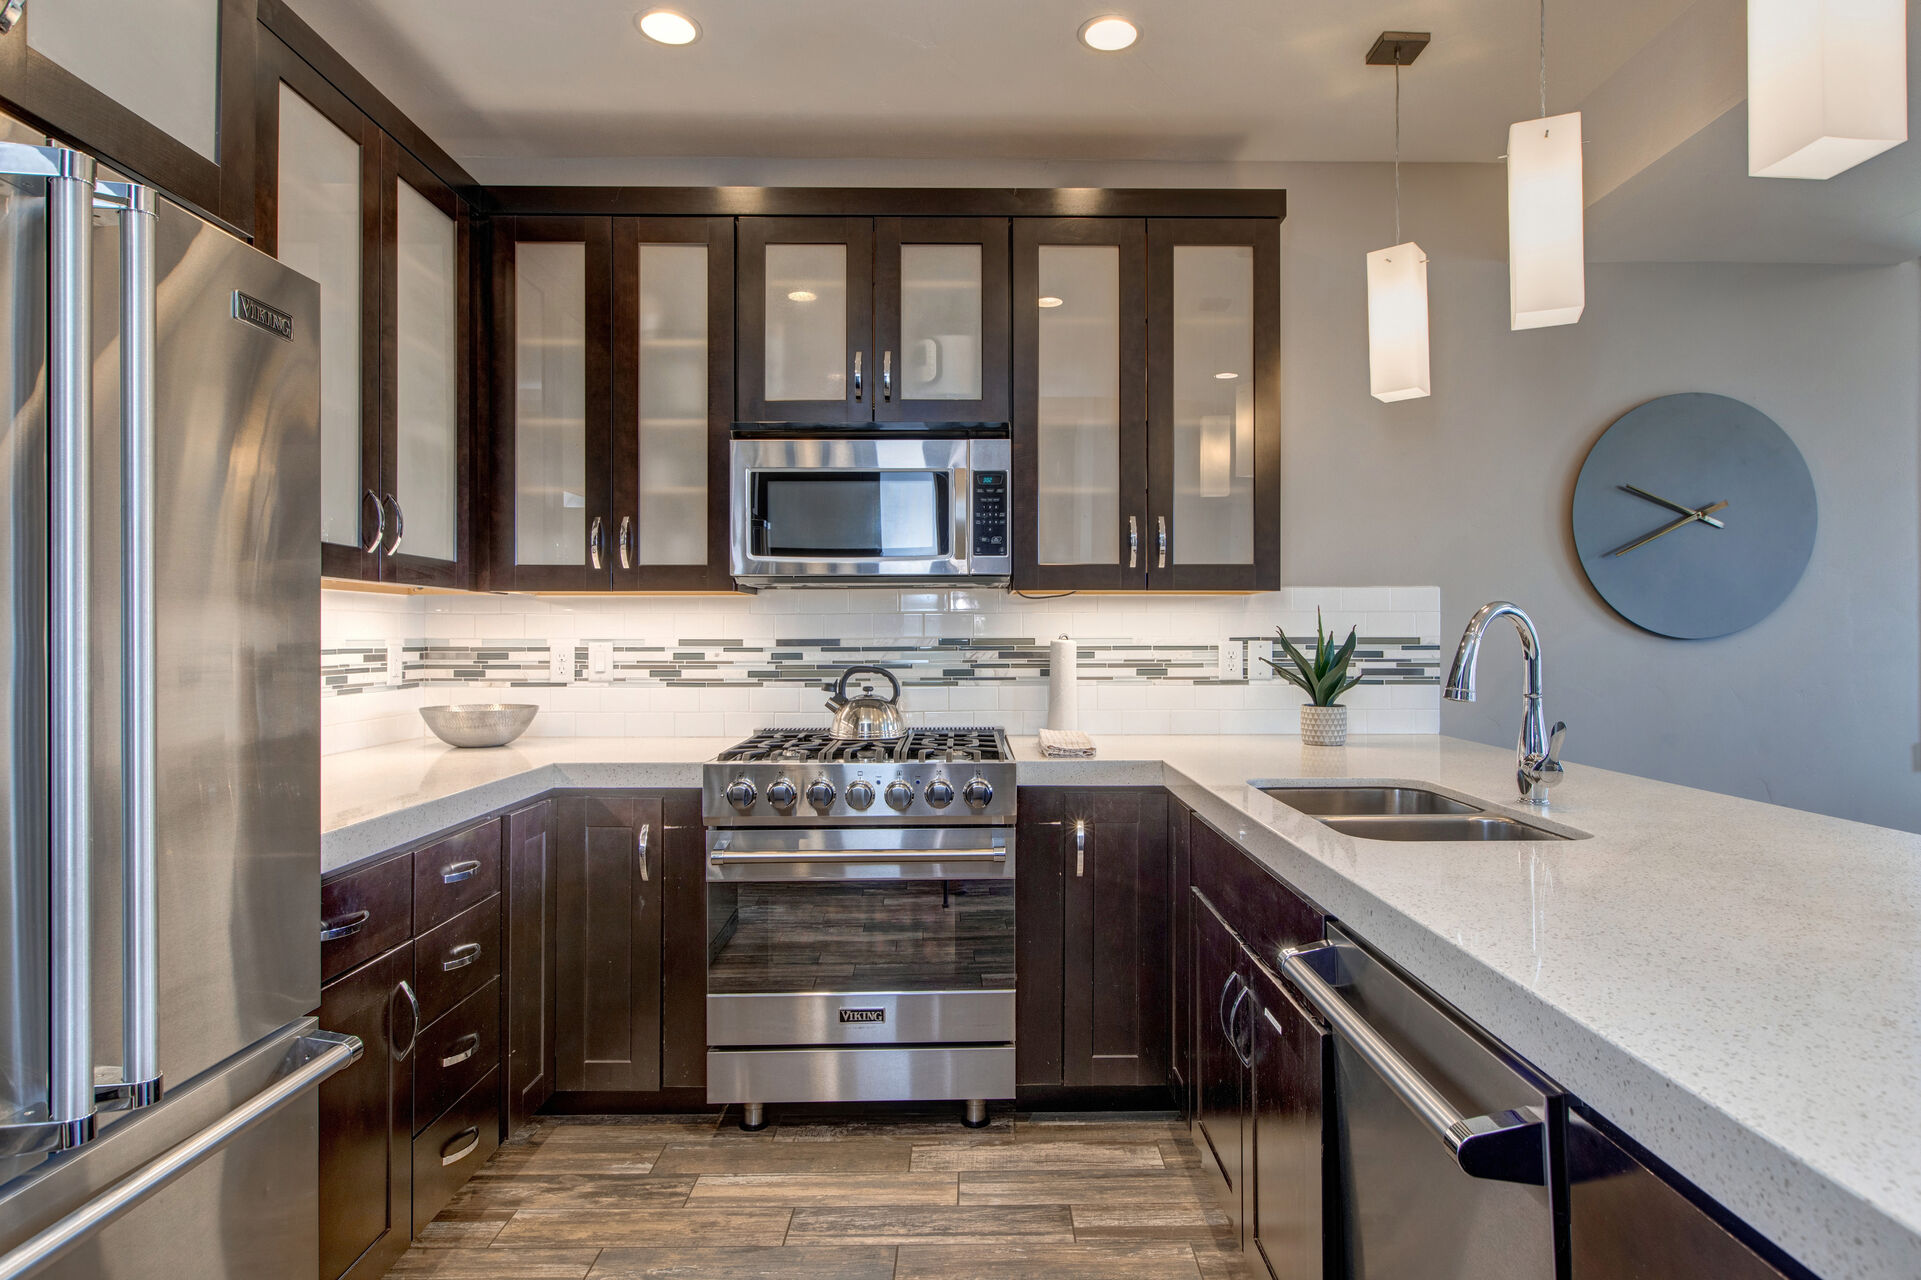 Gourmet Kitchen with Viking Appliances including a 5-Burner Gas Range with a Convection Oven